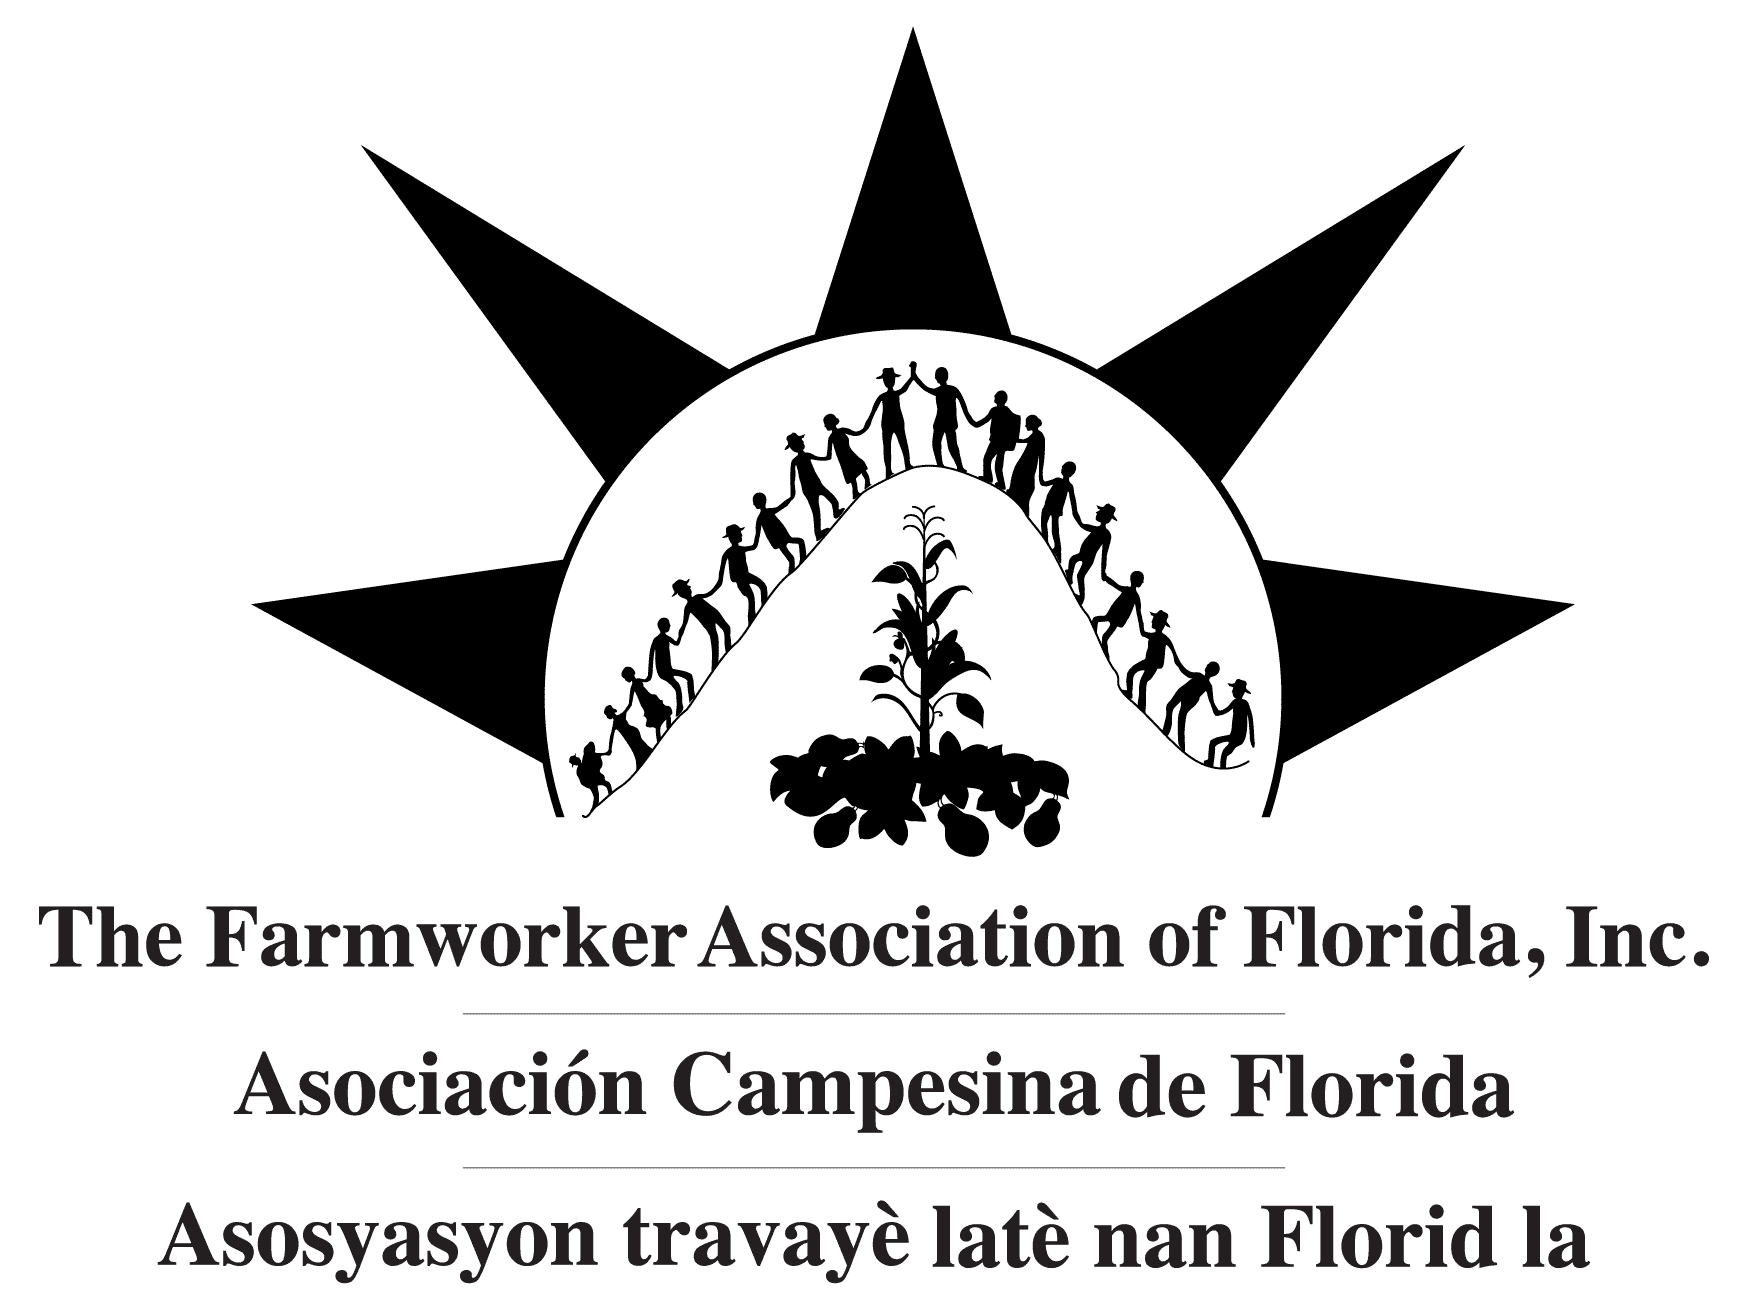 Farmworker Association of Florida logo in black and white in English, Spanish, and Creole